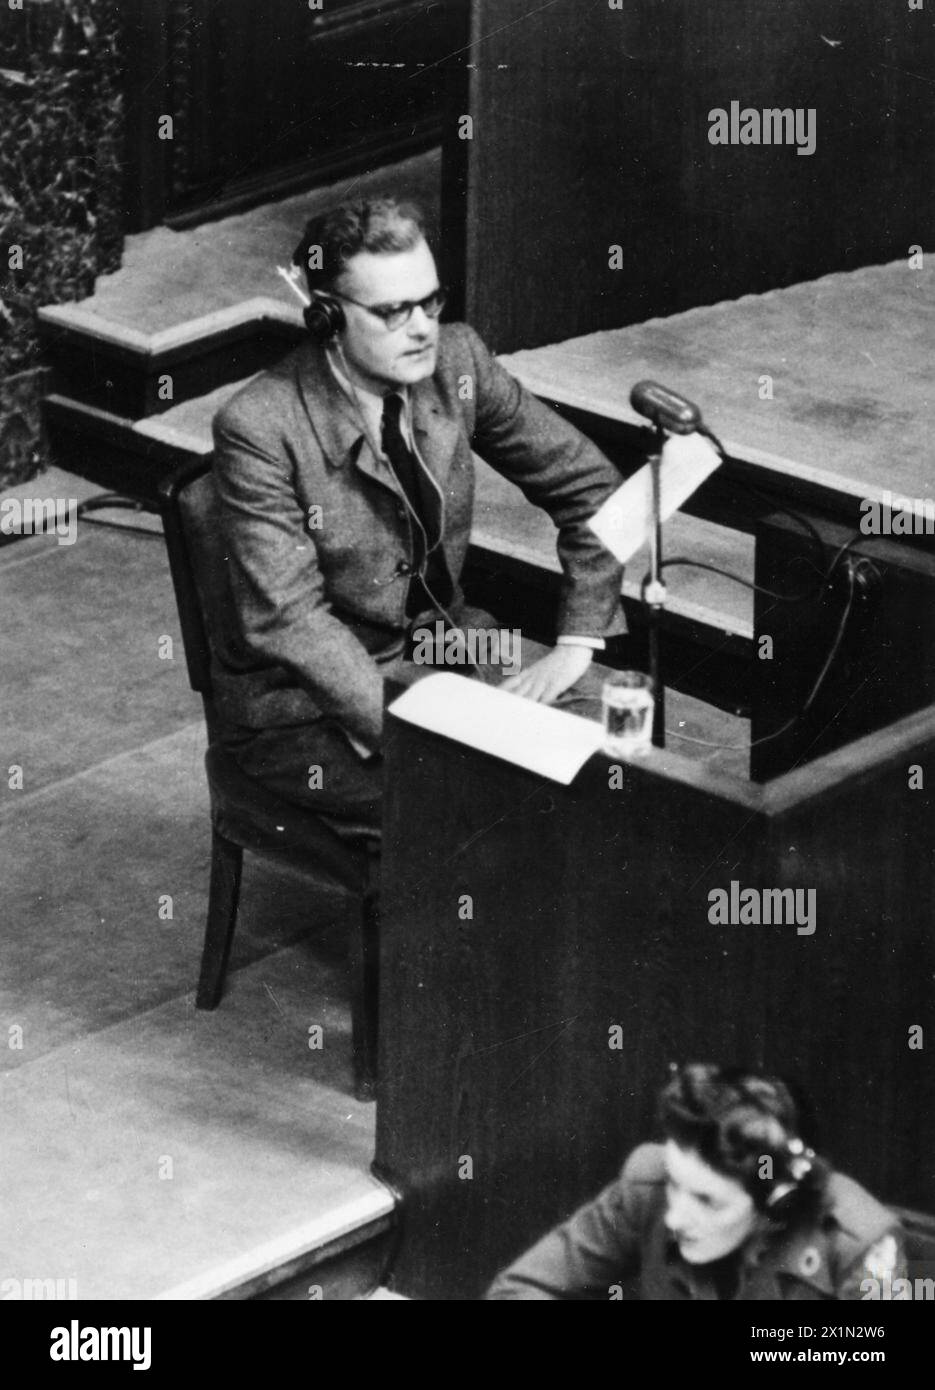 SS MAJOR GIVES EVIDENCE AGAINST KALTENBRUNNER AT NUREMBERG WAR CRIMES TRIALS - SS Major Dieter Wisliceny, described as a Gestapo specialist in Jewish problems giving evidence on 3 January 1946 at Nuremberg. Here he sits in the witness box giving evidence against Ernst Kaltenbrunner, head of Himmler's secret police, Stock Photo